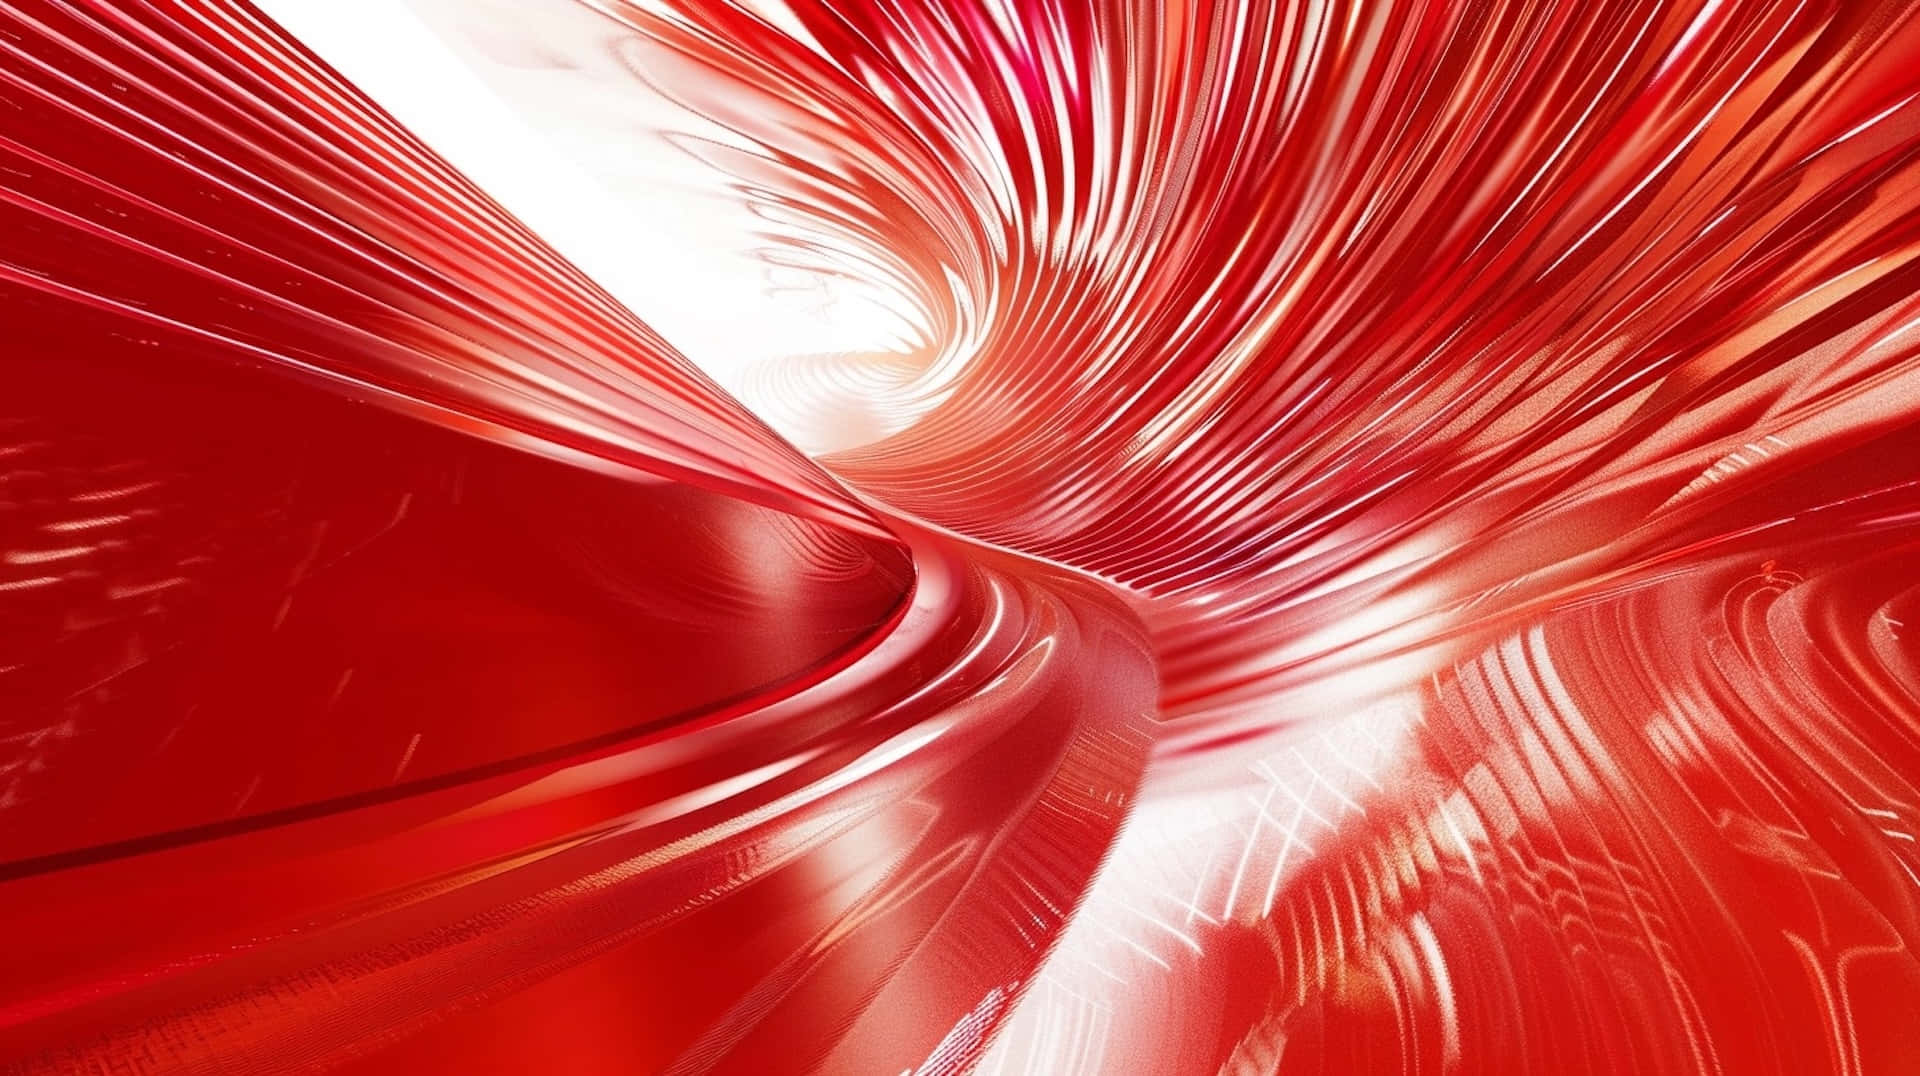 Red Dynamic Abstract Art Wallpaper